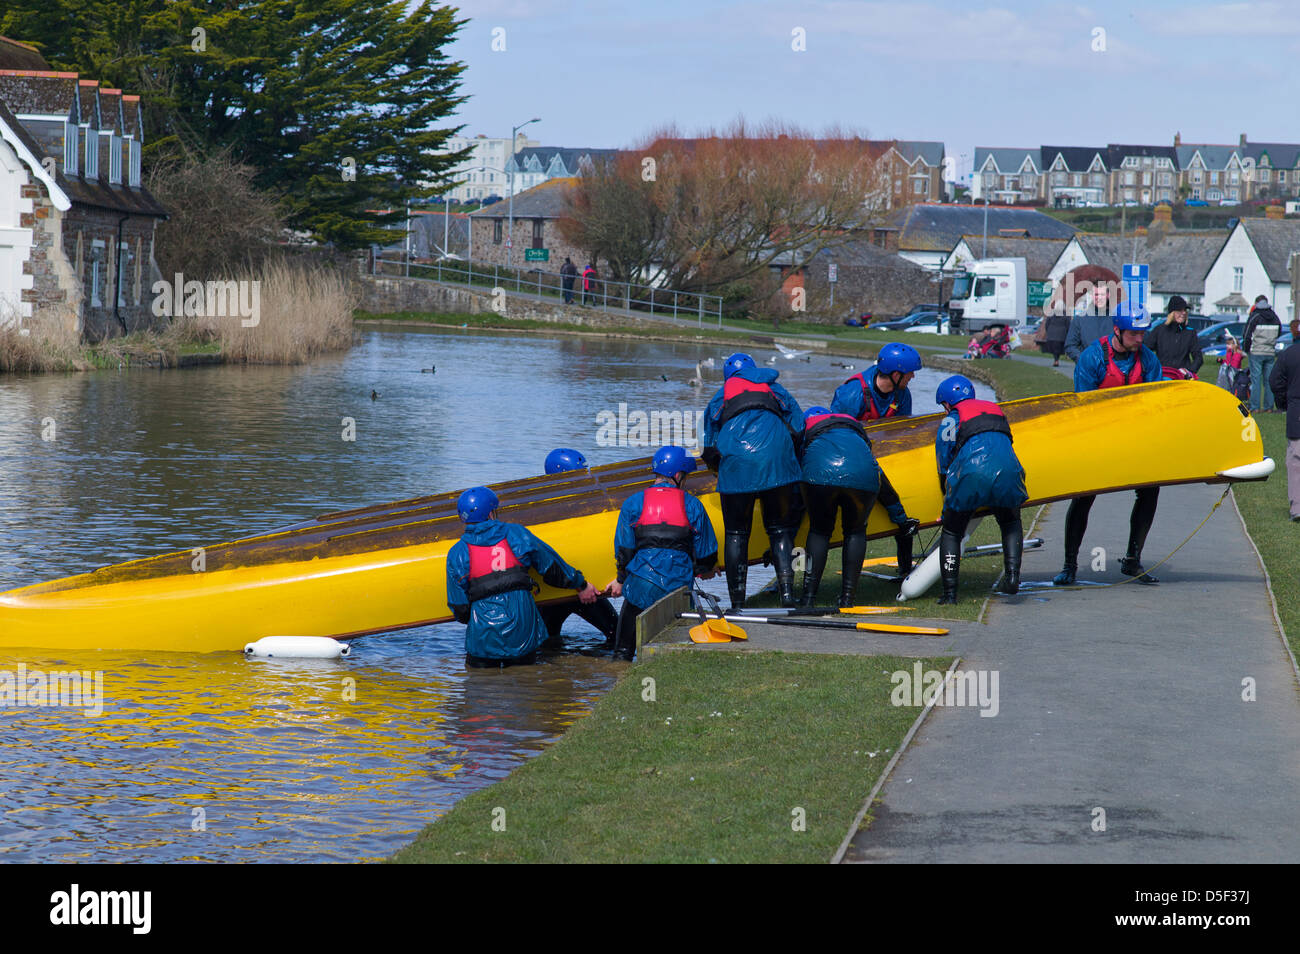 Water activities on the canal at Bude, North Cornwall, UK Stock Photo